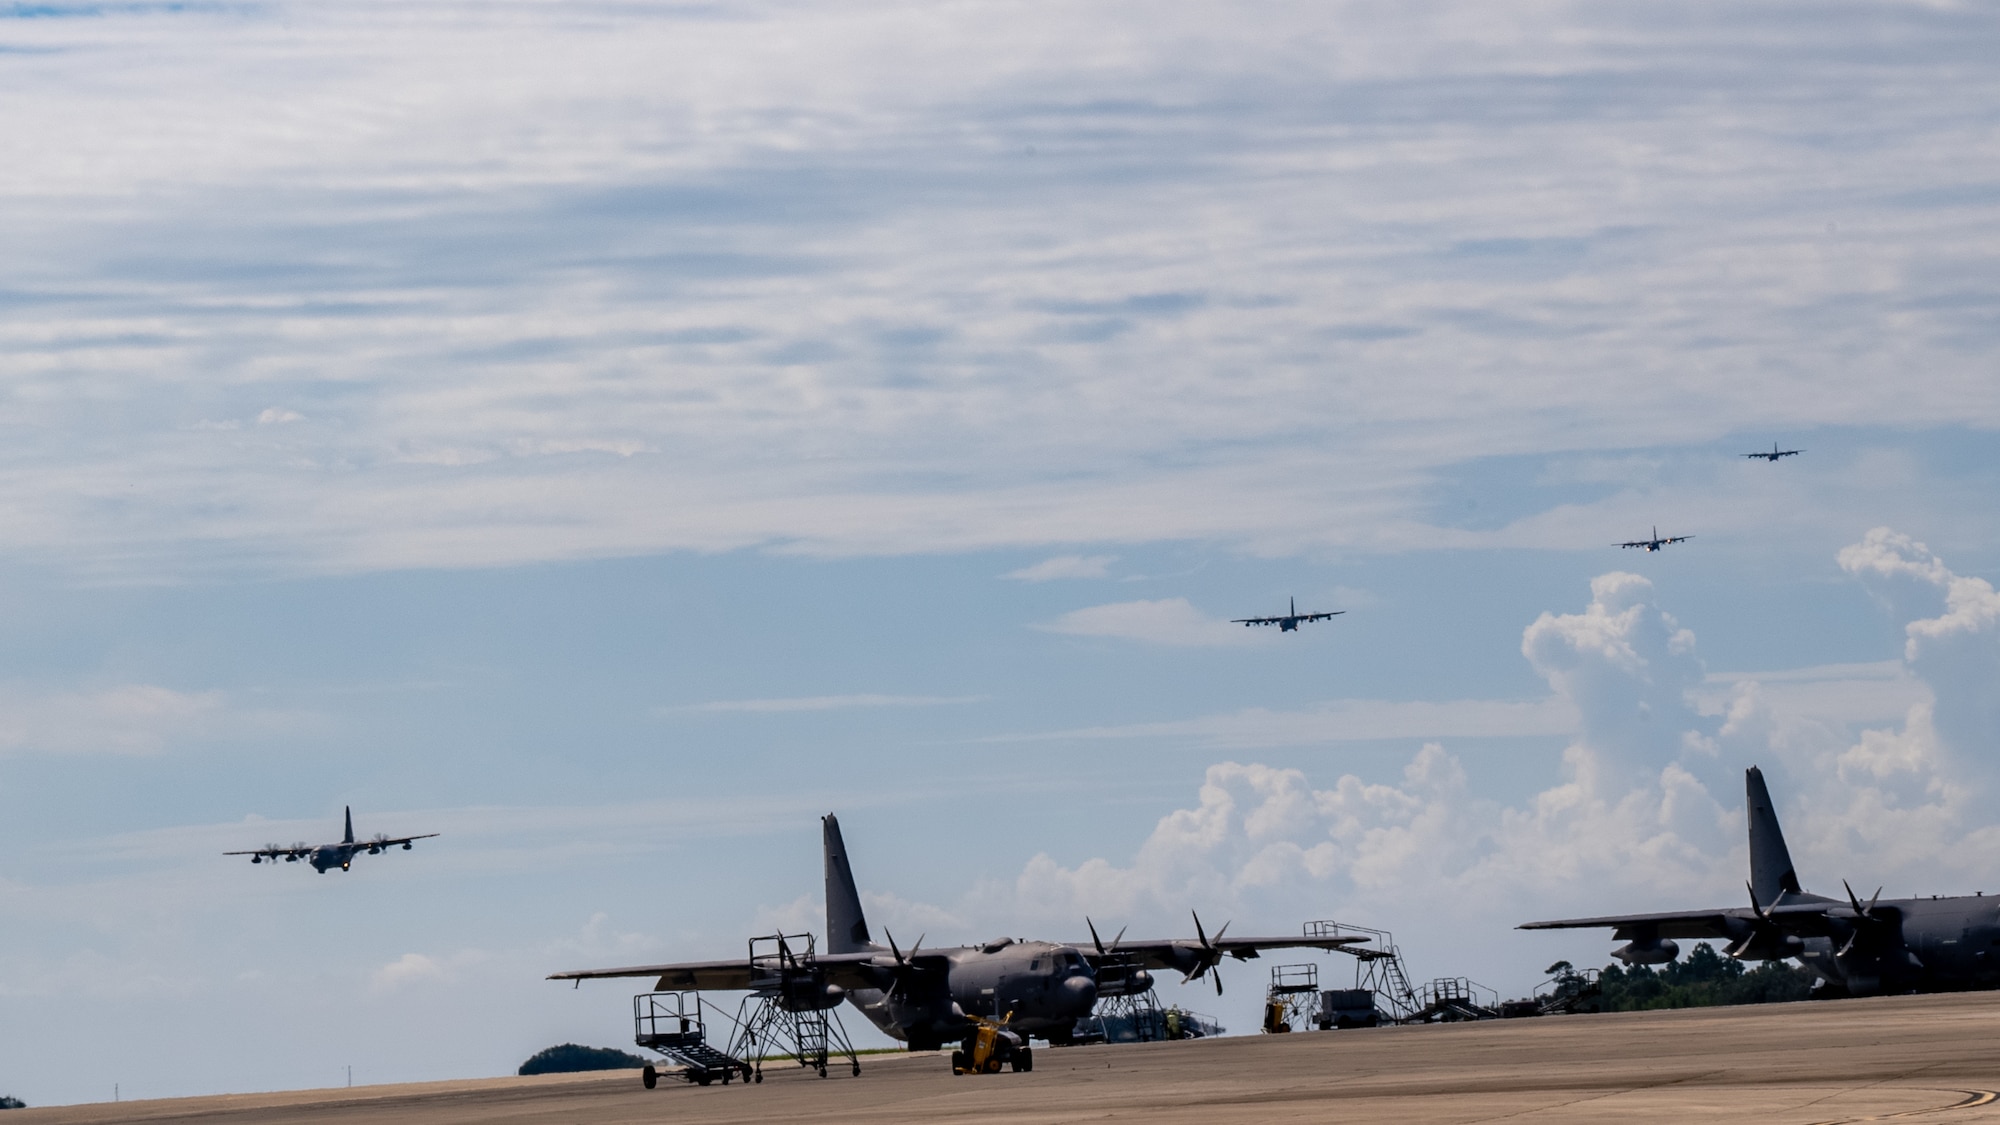 MC-130J Commando II aircrafts assigned to the 15th Special Operations prepare to land at Hurlburt Field, Florida, Sept. 21, 2023. Crews conducted a four-ship formation flight as part of a demonstration for the 94th Joint Civilian Orientation Conference at Hurlburt Field. (U.S. Air Force photo by Airman 1st Class Hussein Enaya)